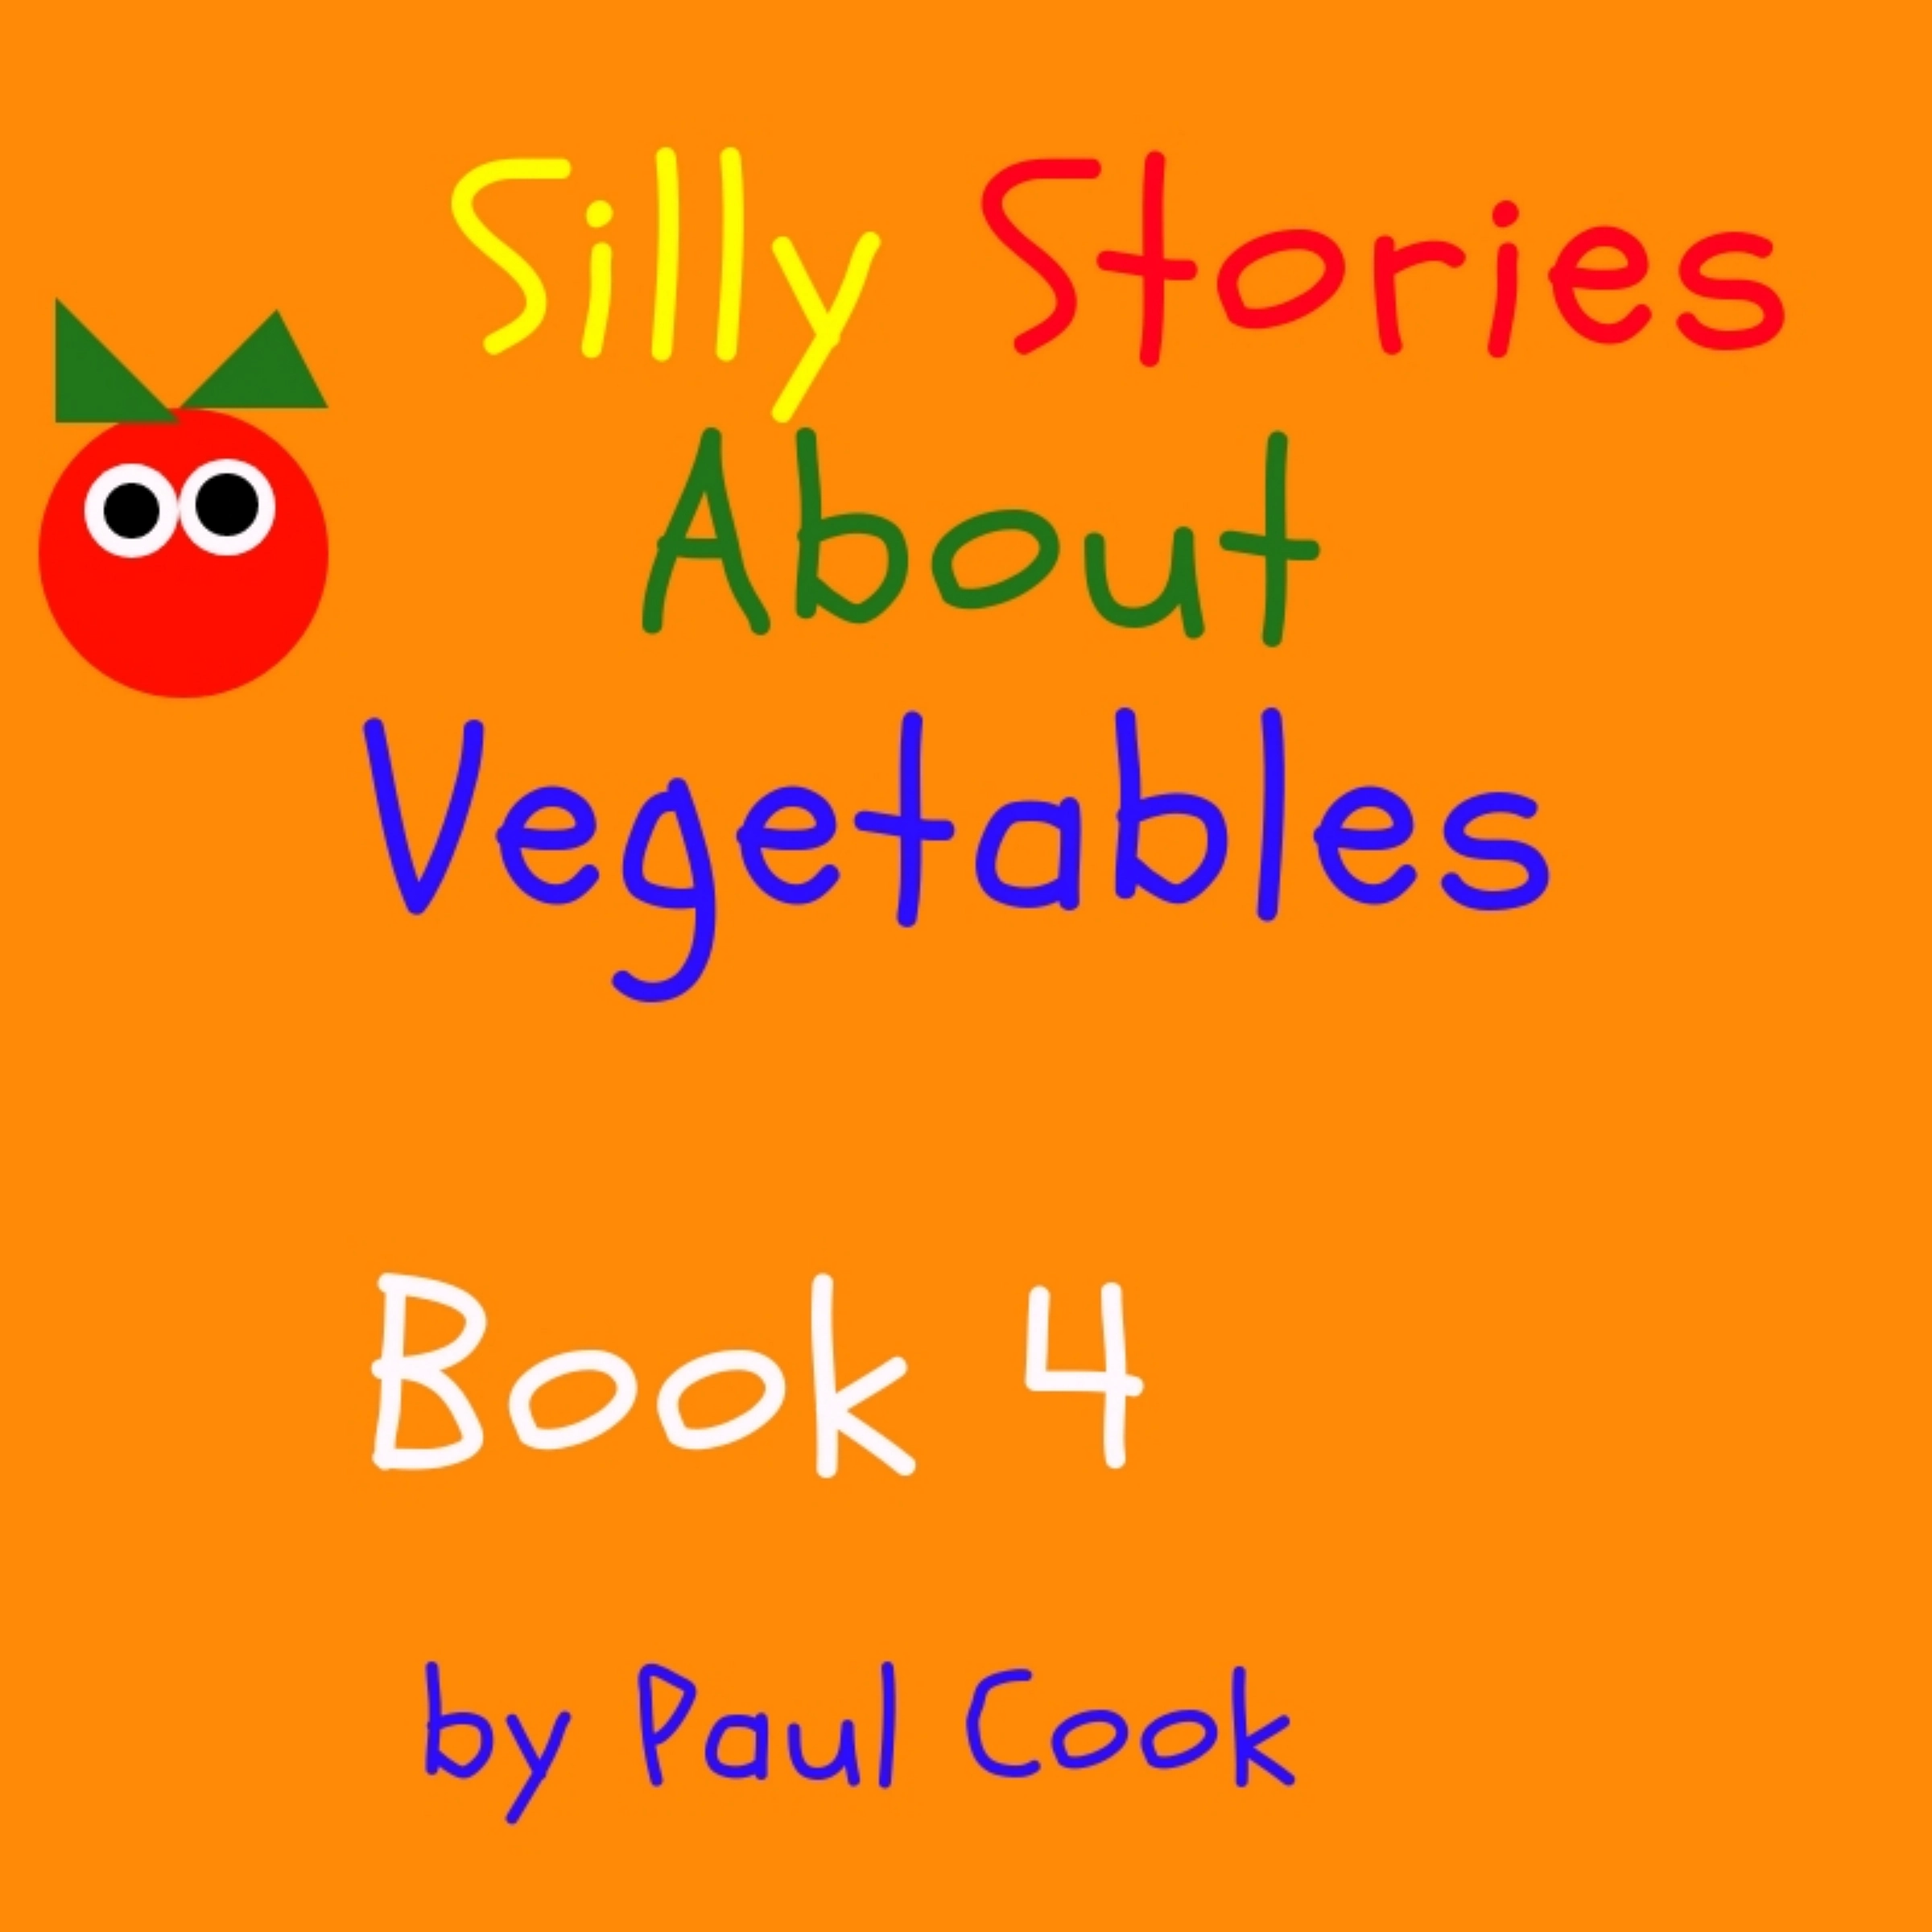 Silly Stories About Vegetables Book 4 Audiobook by Paul Cook